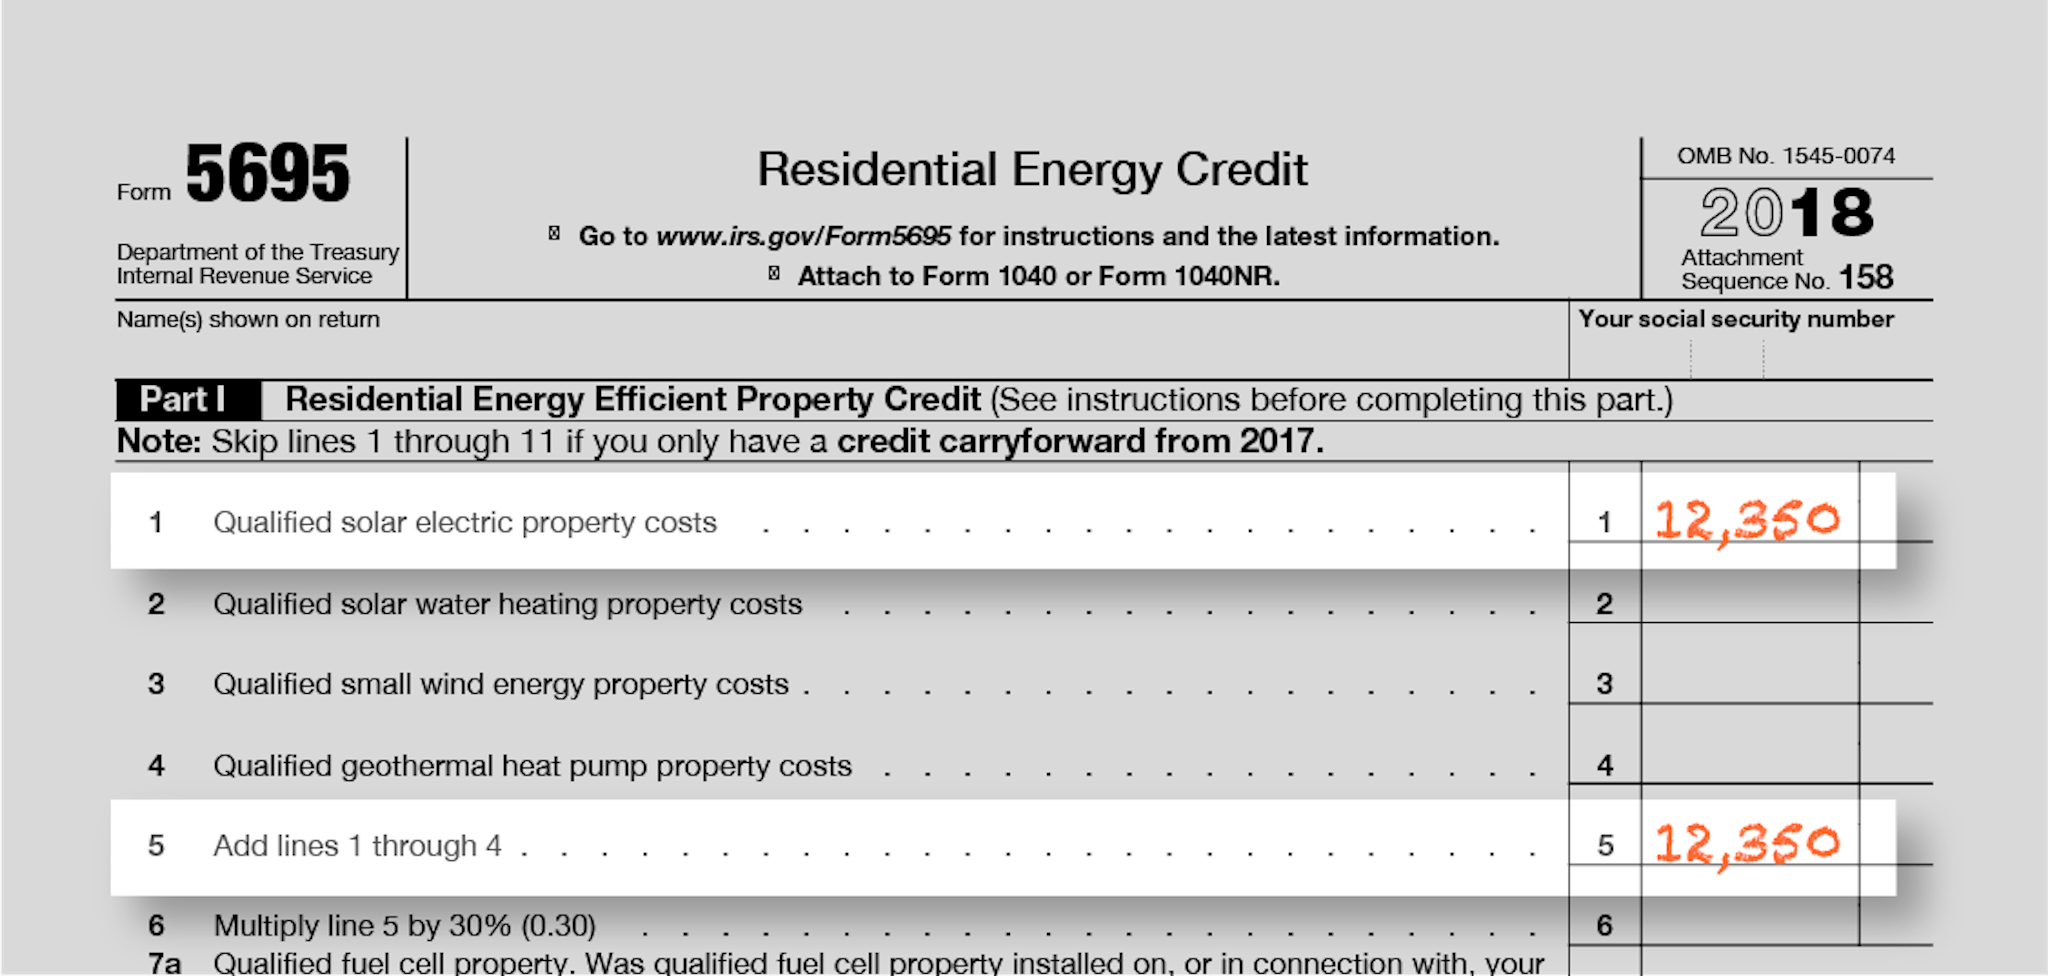 How to File IRS Form 5695 To Claim Your Renewable Energy Credits